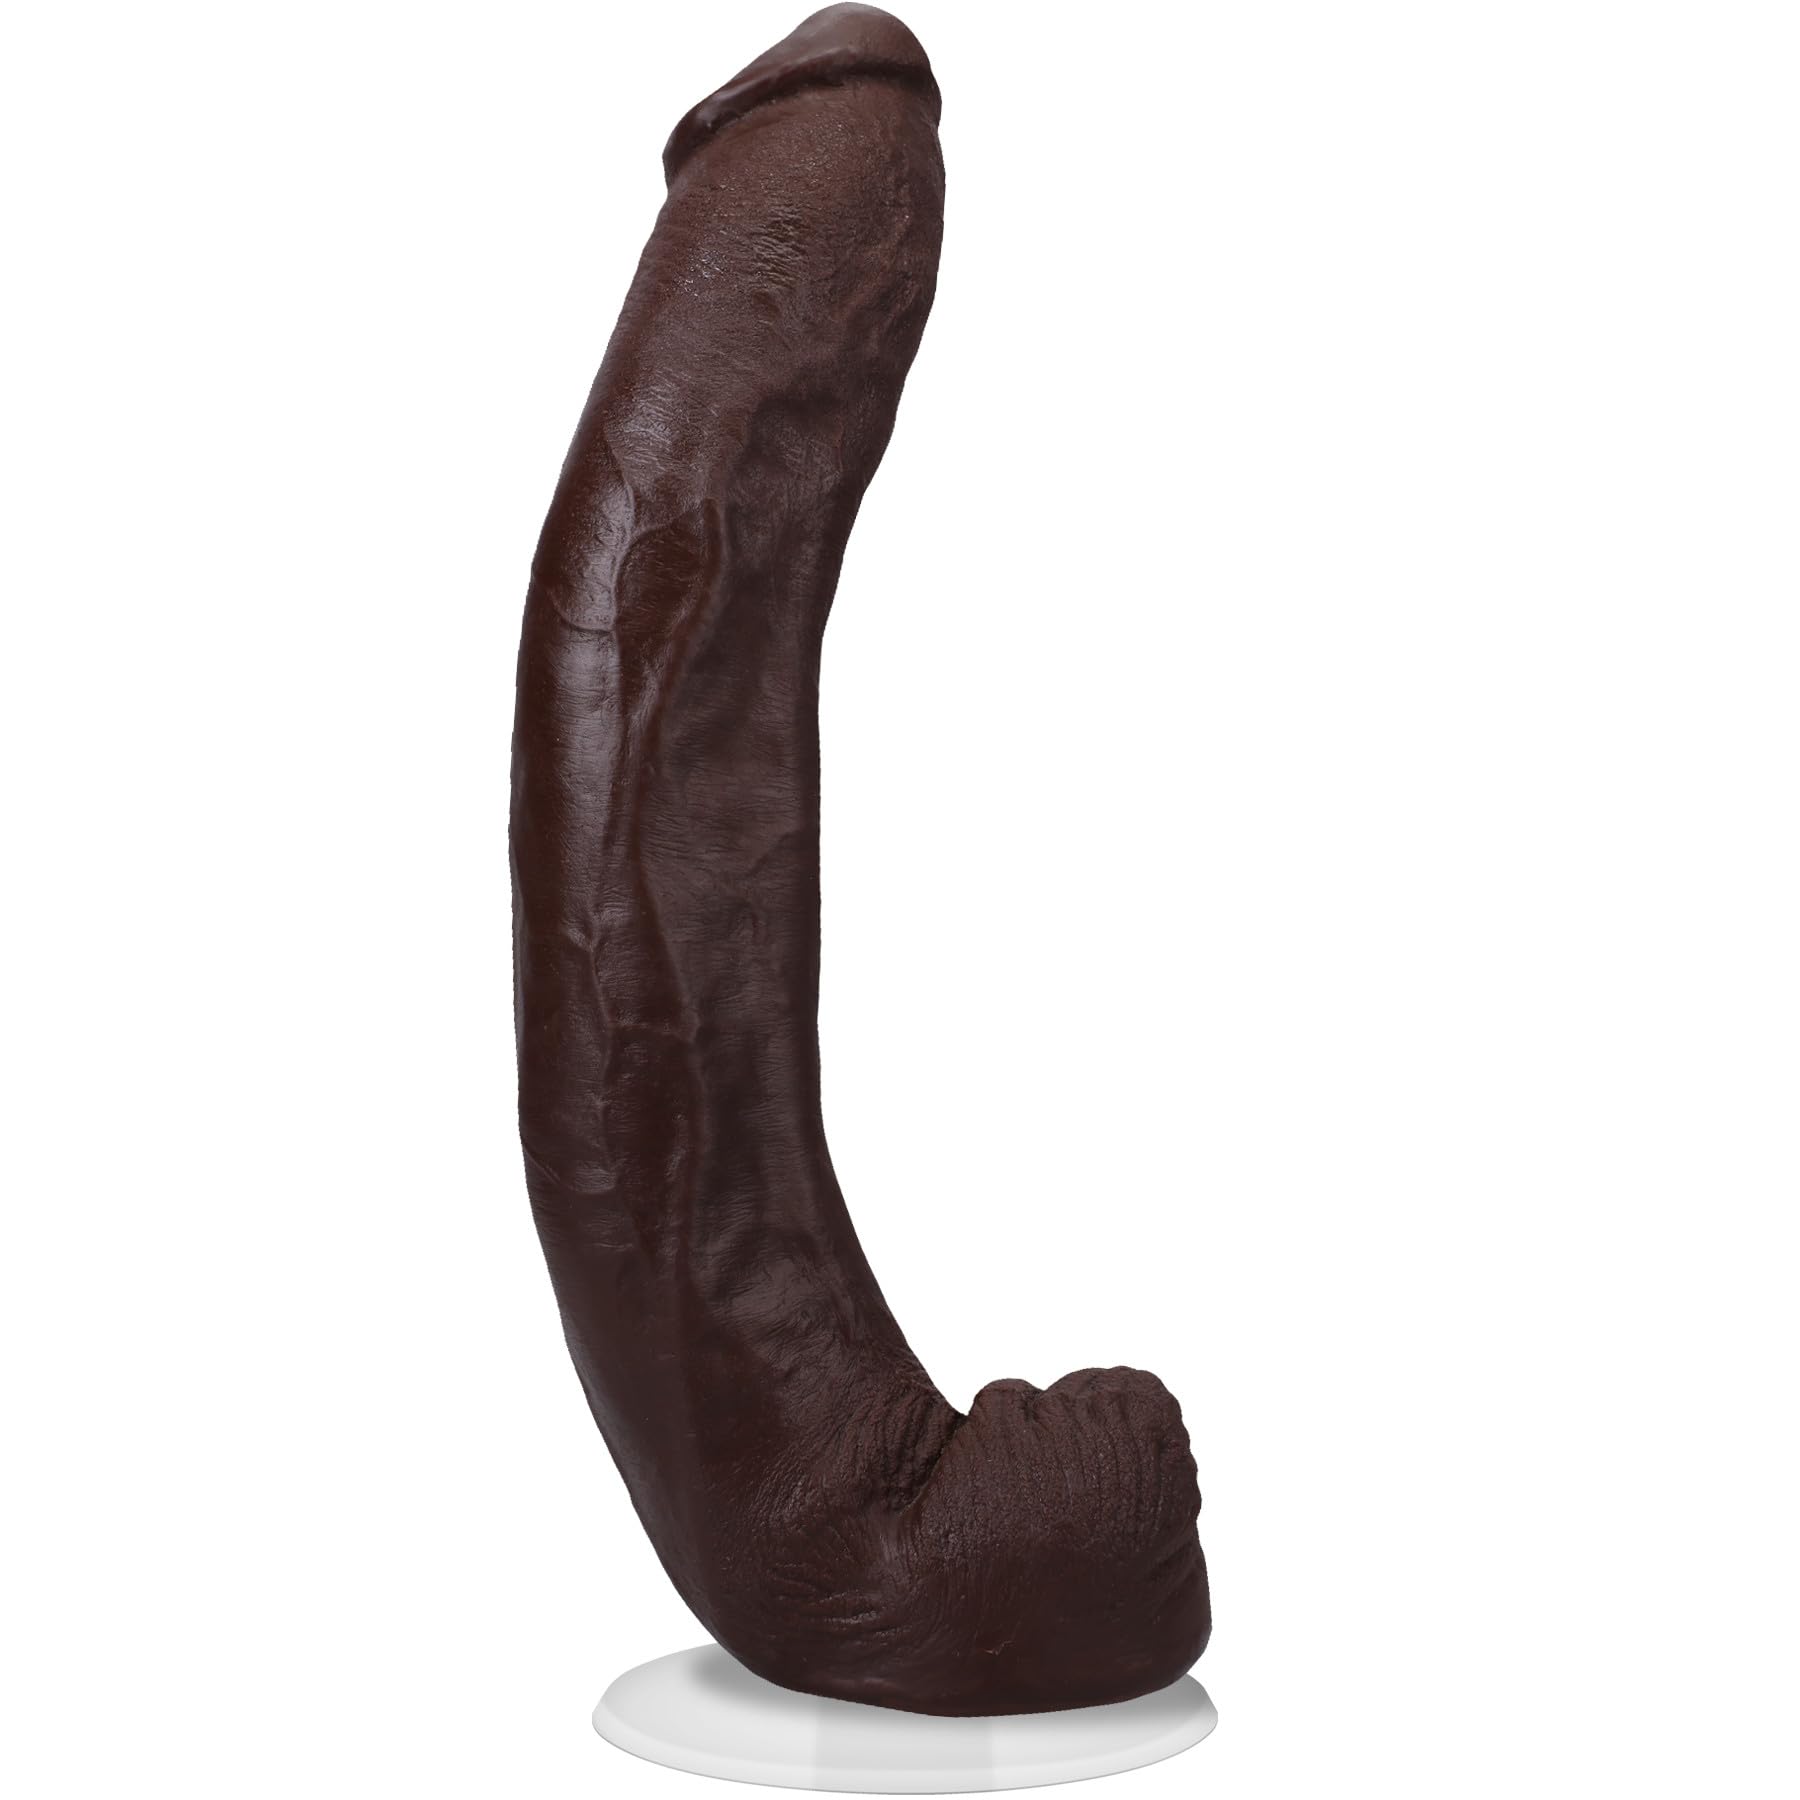 Doc Johnson Signature Series - Dredd - 13.5 Inch ULTRASKYN Dildo with Removable Vac-U-Lock Suction Cup - F-Machine & Harness Compatible - for Adults Only, Chocolate